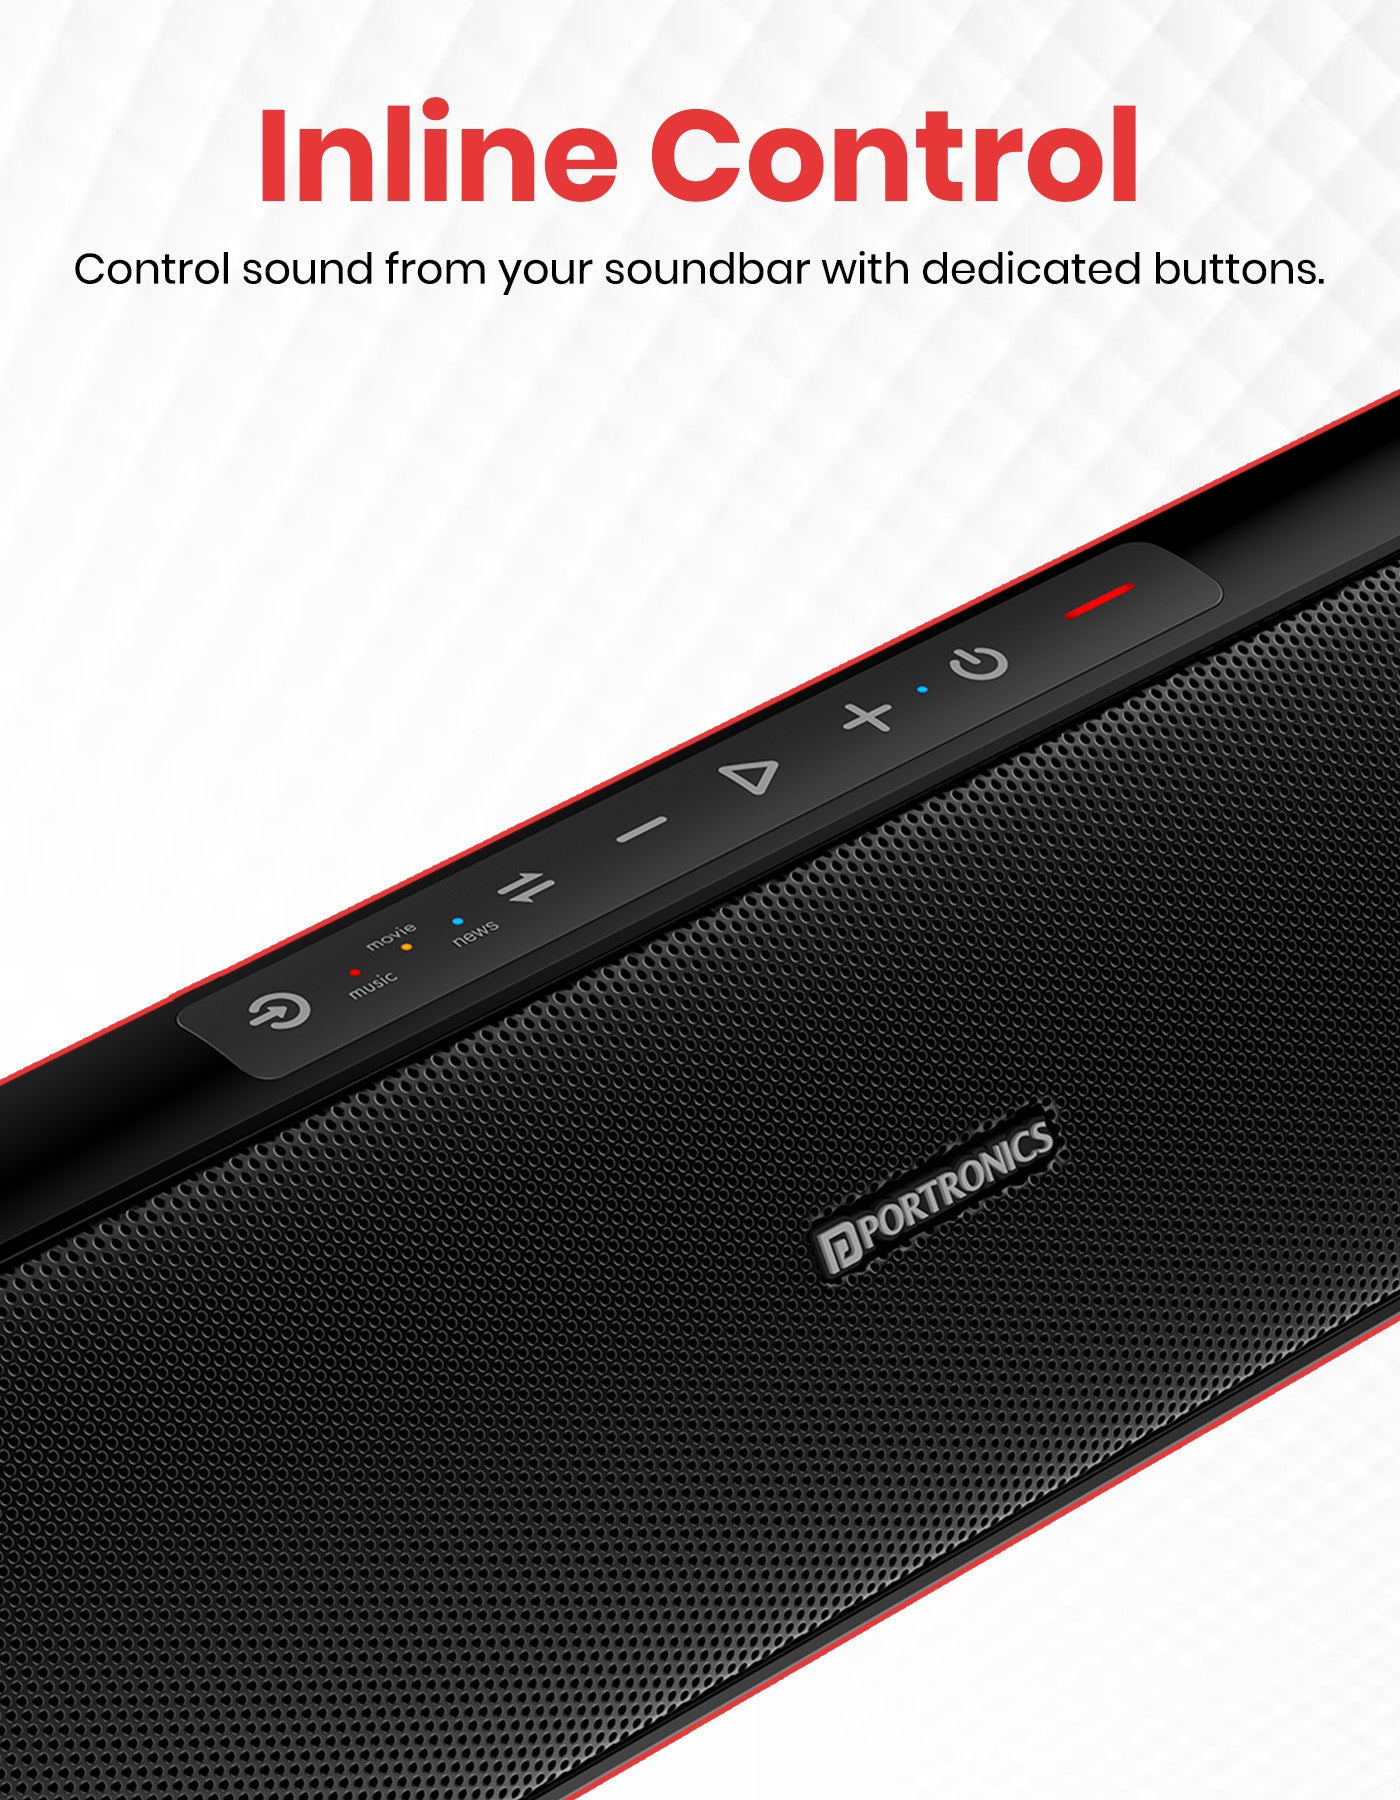 Portronics Pure Sound Pro wireless 80w soundbar with subwoofer  with in line control dedicated buttons for volume and music control